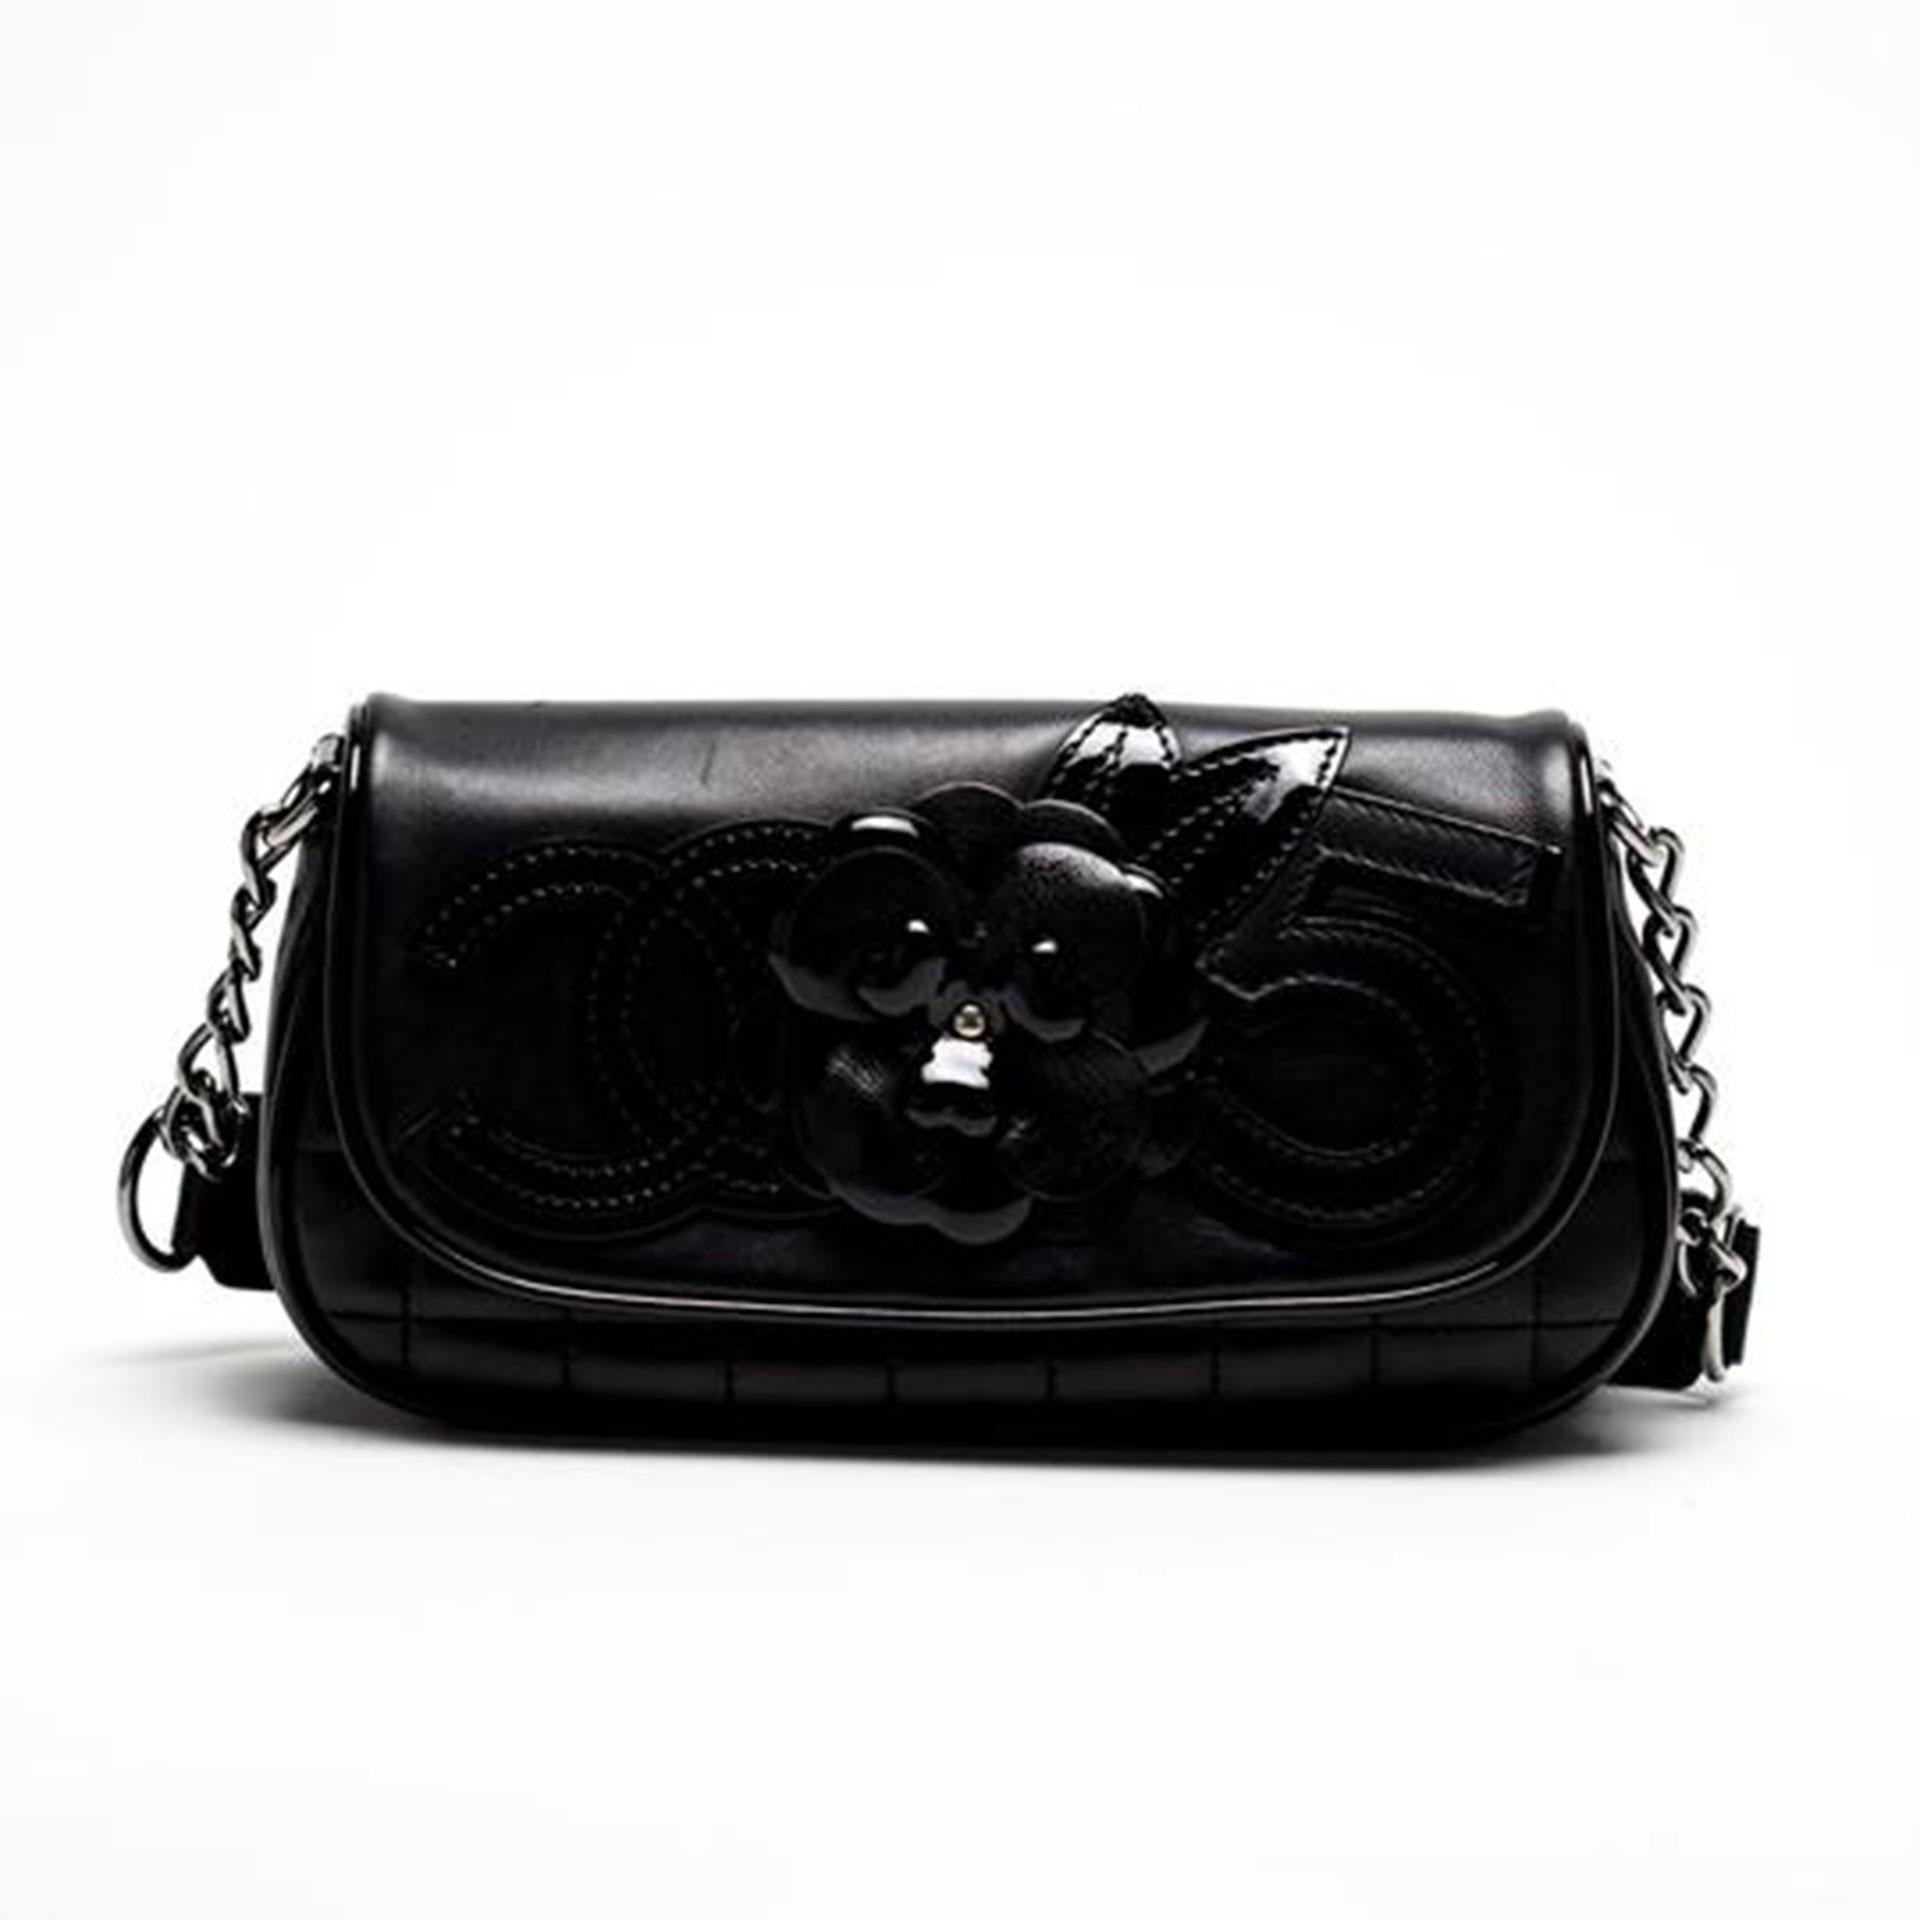 Chanel 2005 Cambon Quilted Lambskin Camellia No. 5 Flap Black Leather Bag For Sale 2